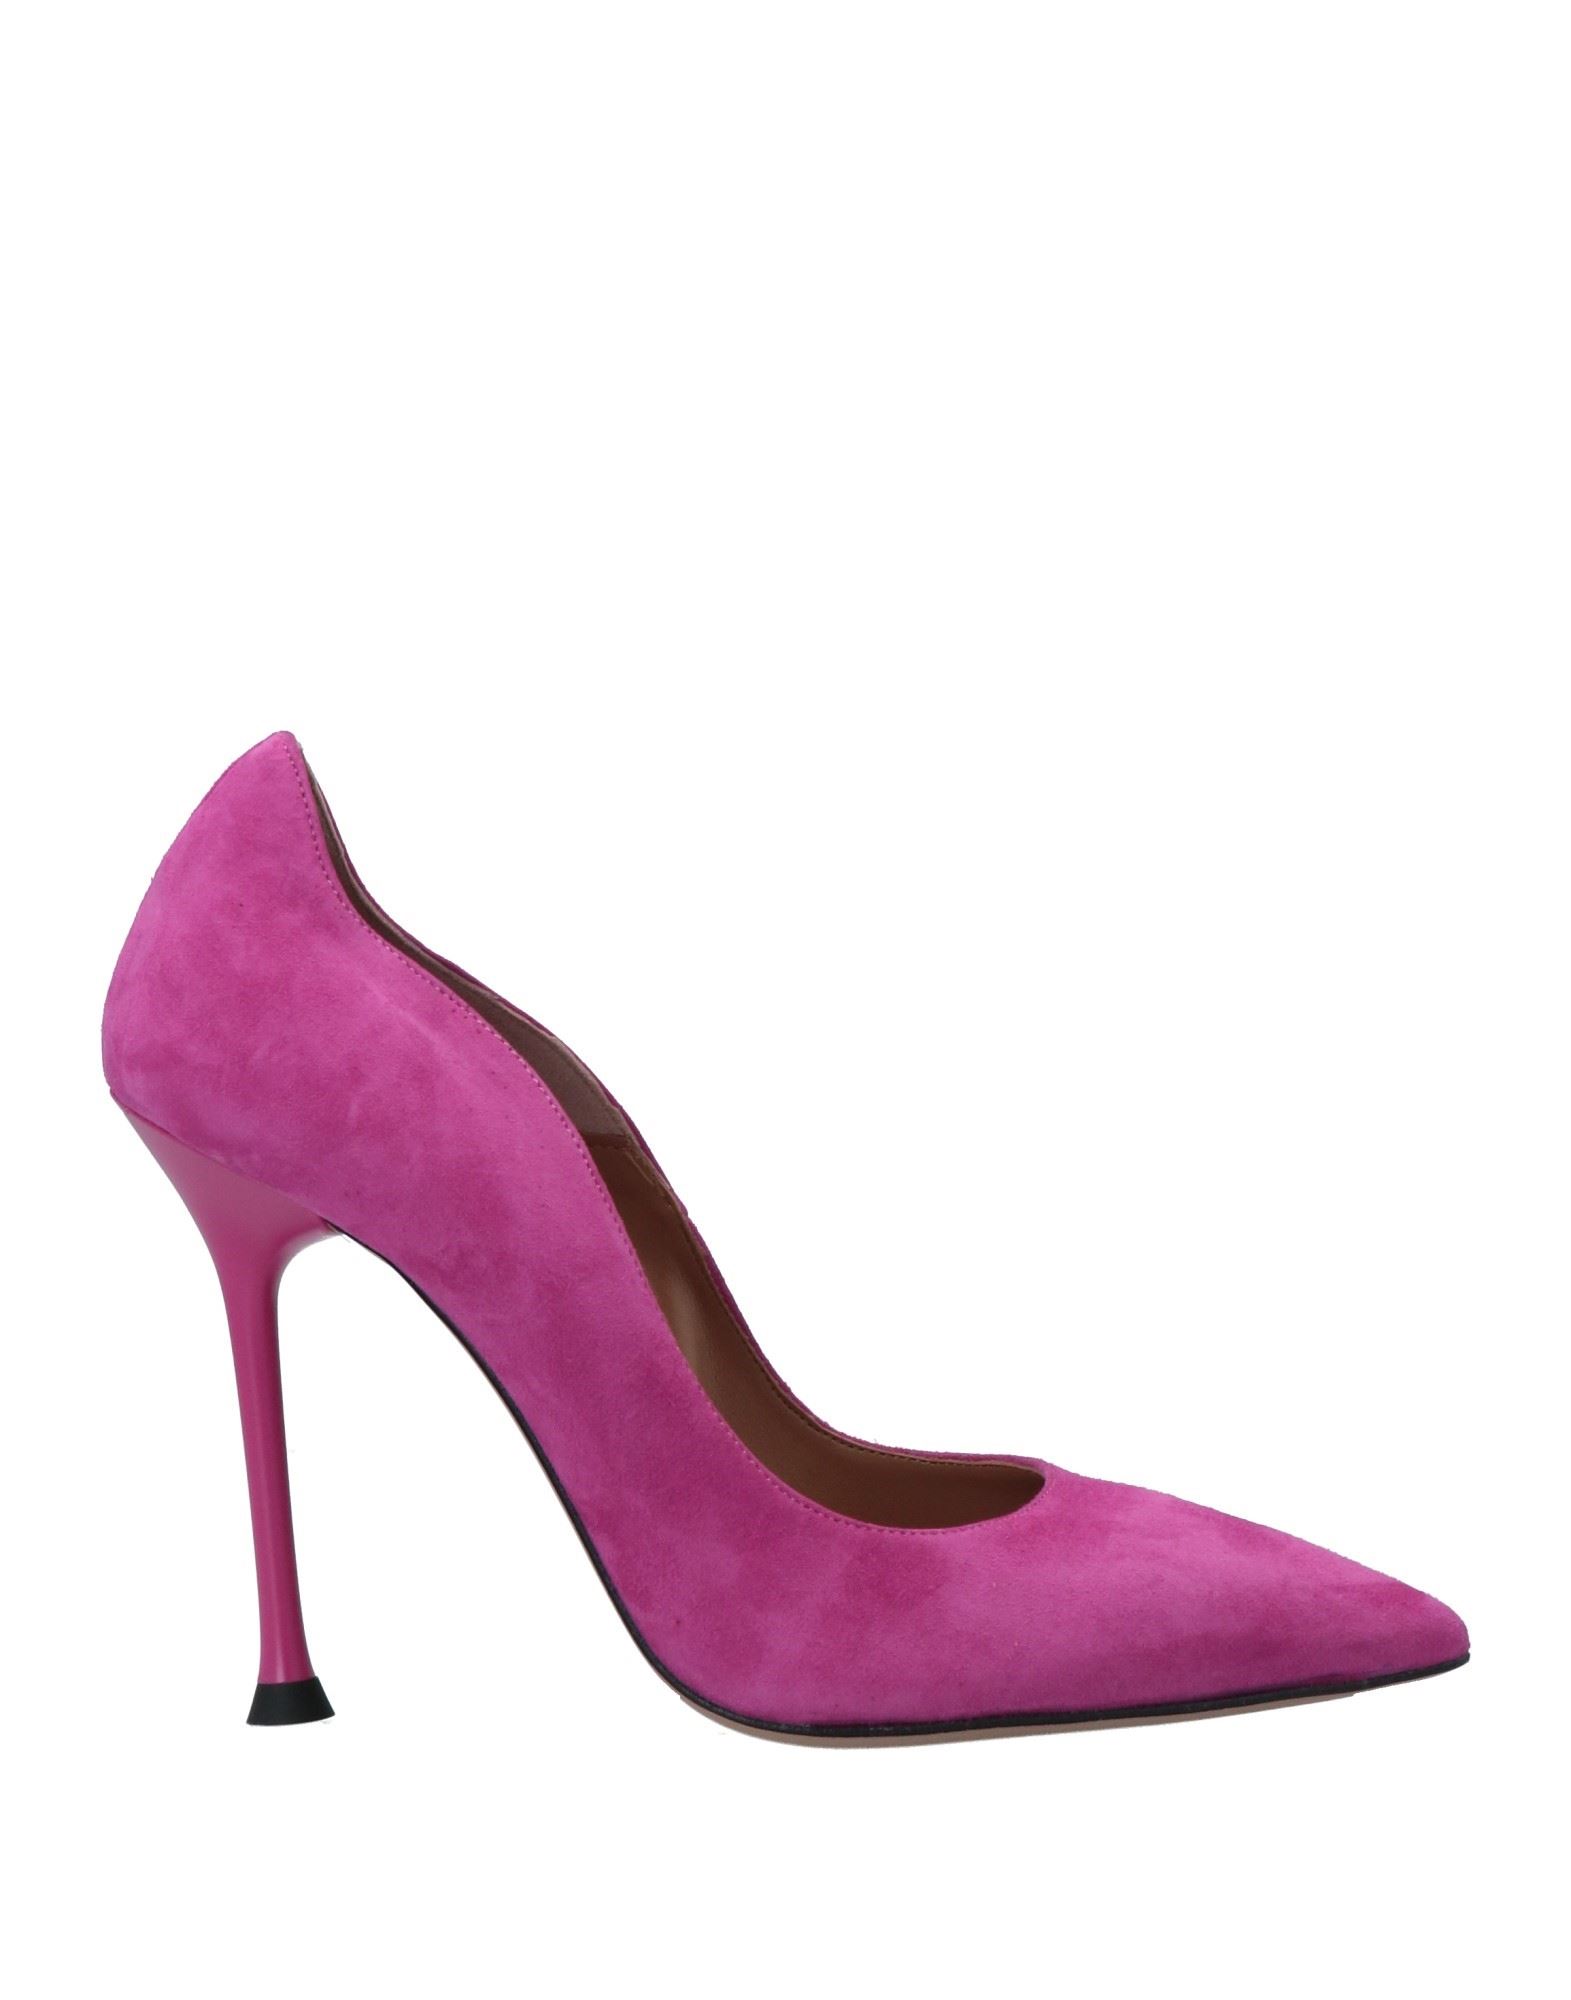 Islo Isabella Lorusso Pumps In Pink